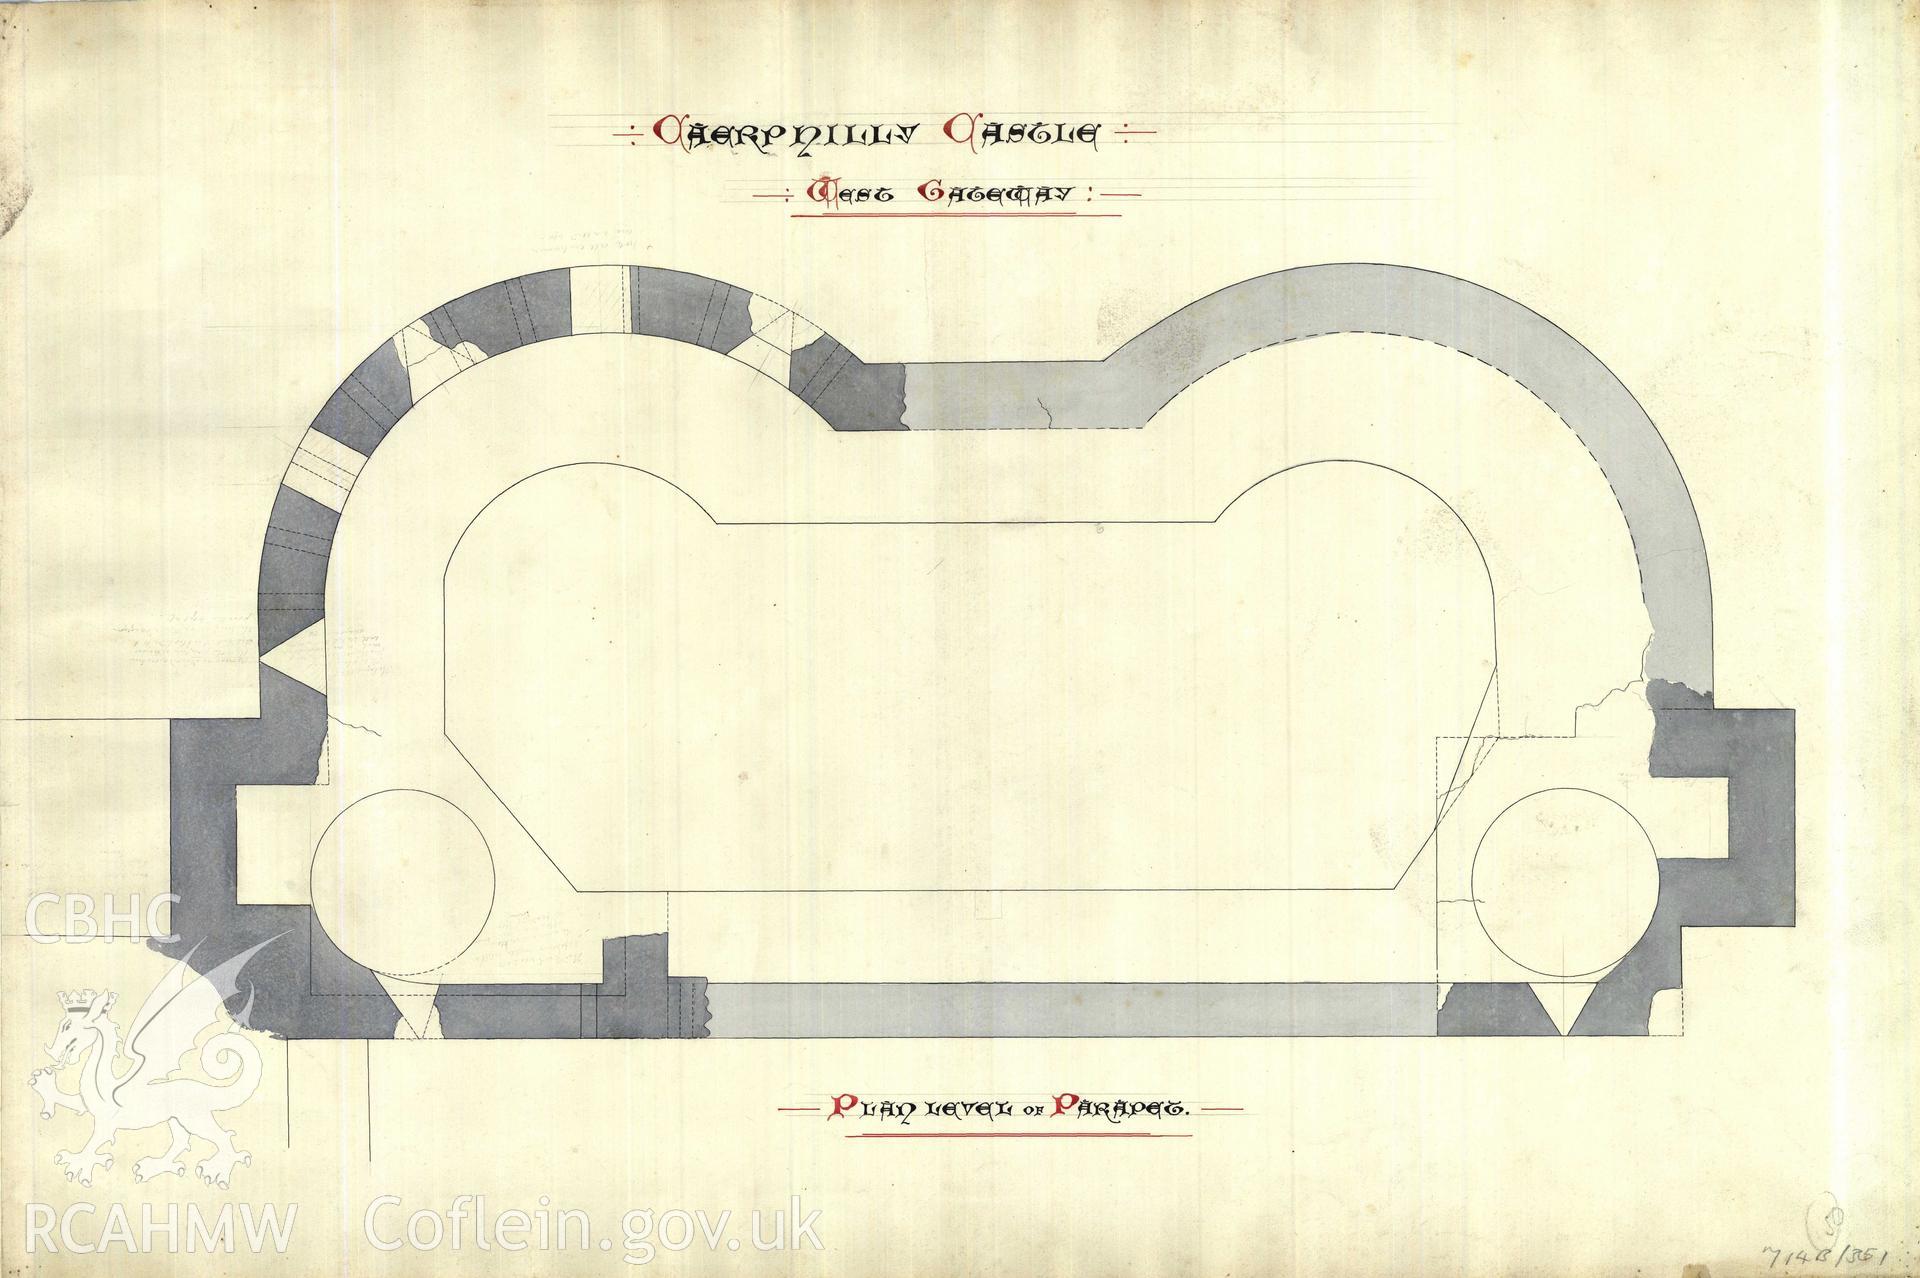 Cadw guardianship monument drawing of Caerphilly Castle. Inner W gate, parapet plan. Cadw Ref. No:714B/351. Scale 1:24.